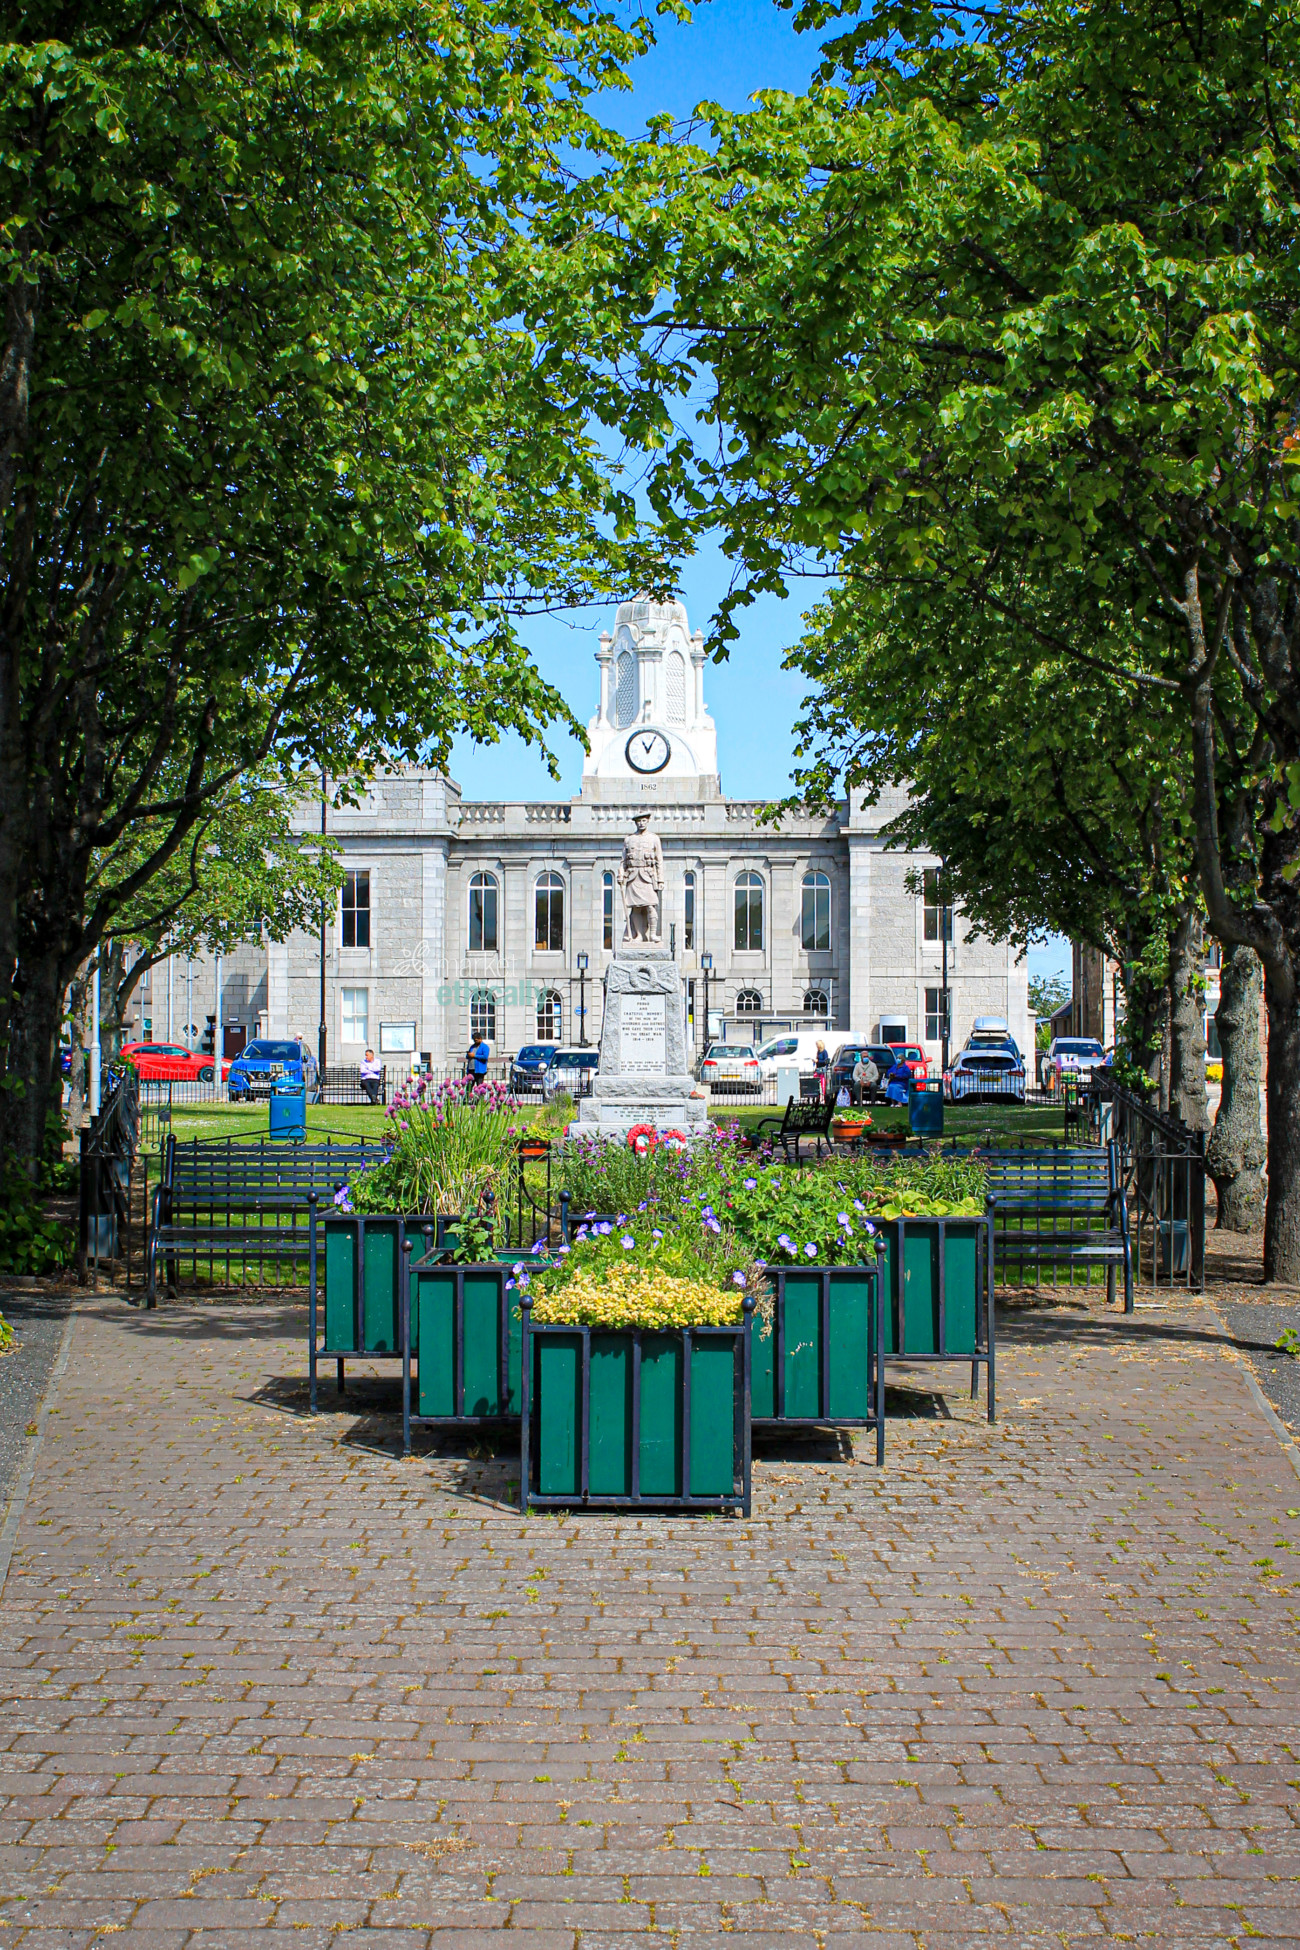 Town Hall Planning Applications Withdrawn